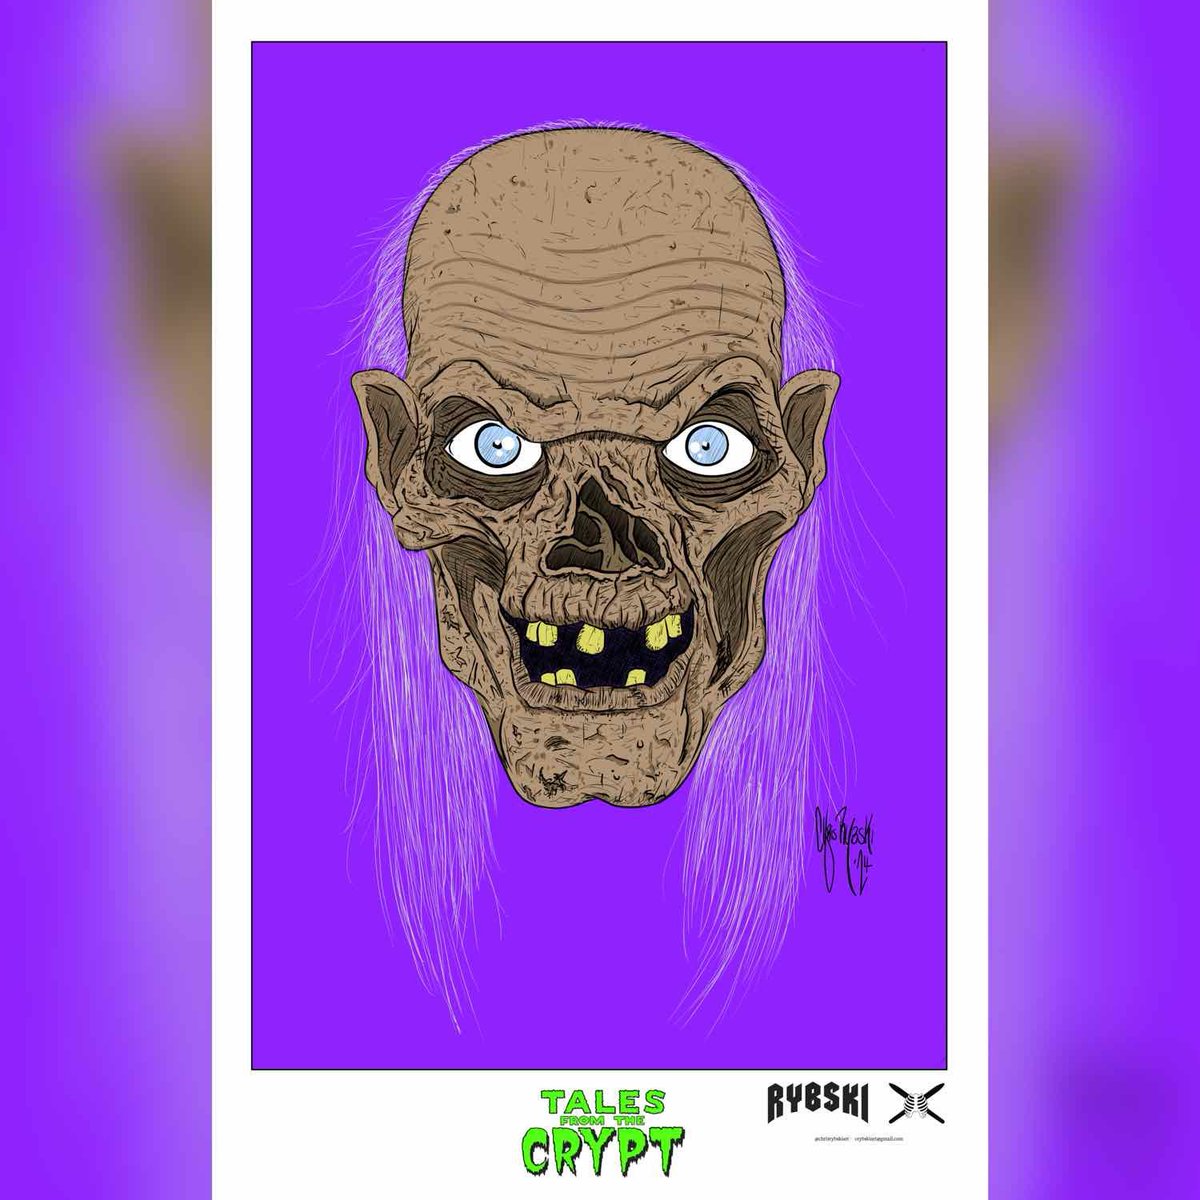 Cryptkeeper (colored version)

@drip_haus  I submitted an artist application earlier this week. Would love an opportunity 🙏🏻
#cryptkeeper #talesfromthecrypt #eccomics #horror #horrorcomics #horrorart #horrorartwork #horrormoviesfan #horrormovie @chicago_bullish